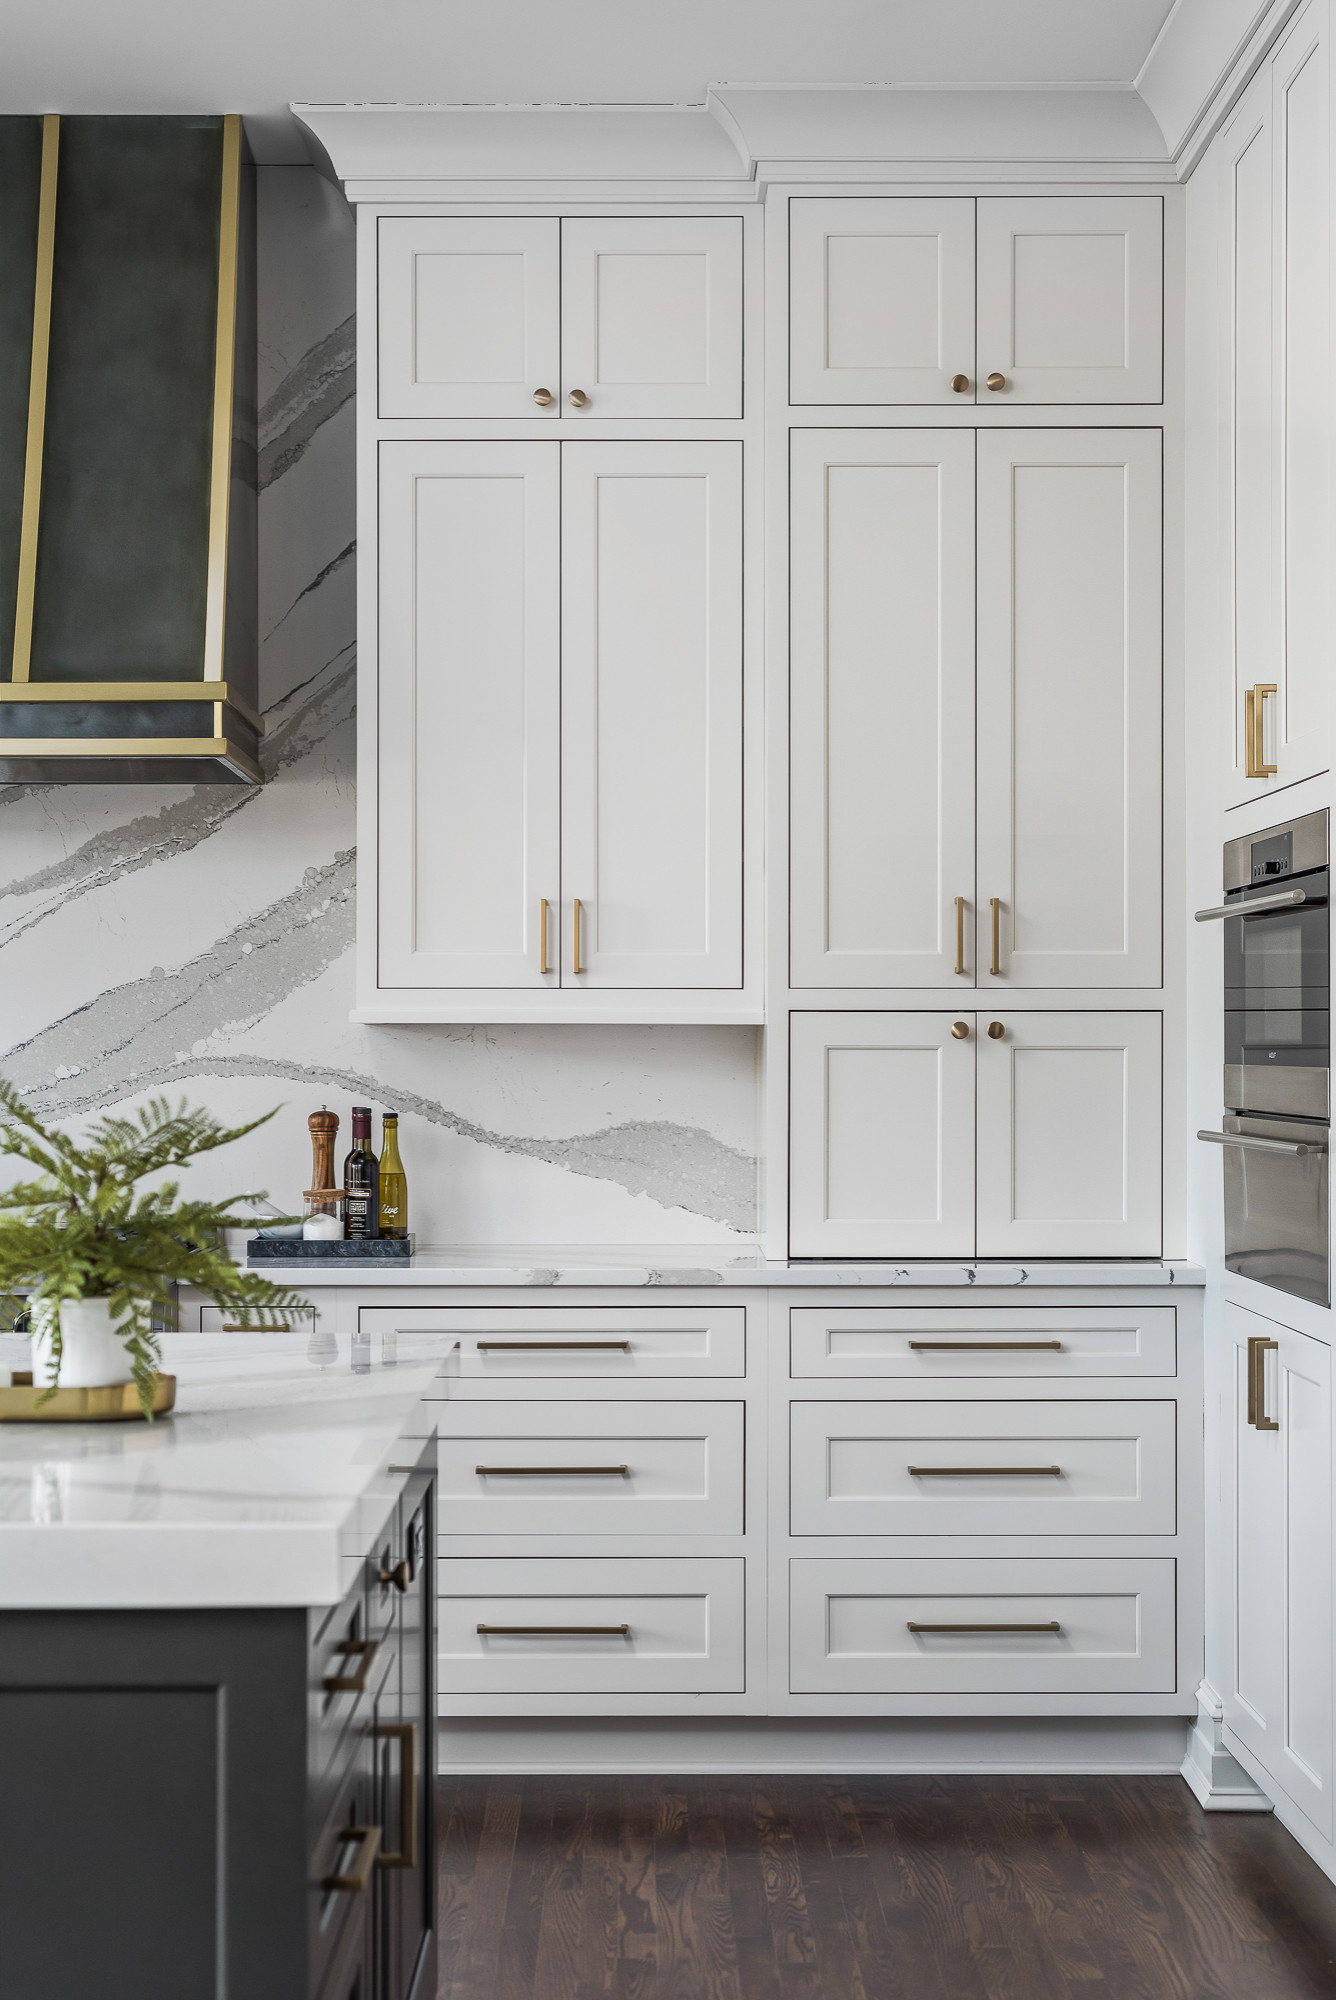 Antique brass hardware accents off white shaker cabinets topped with white  and gray marbl…